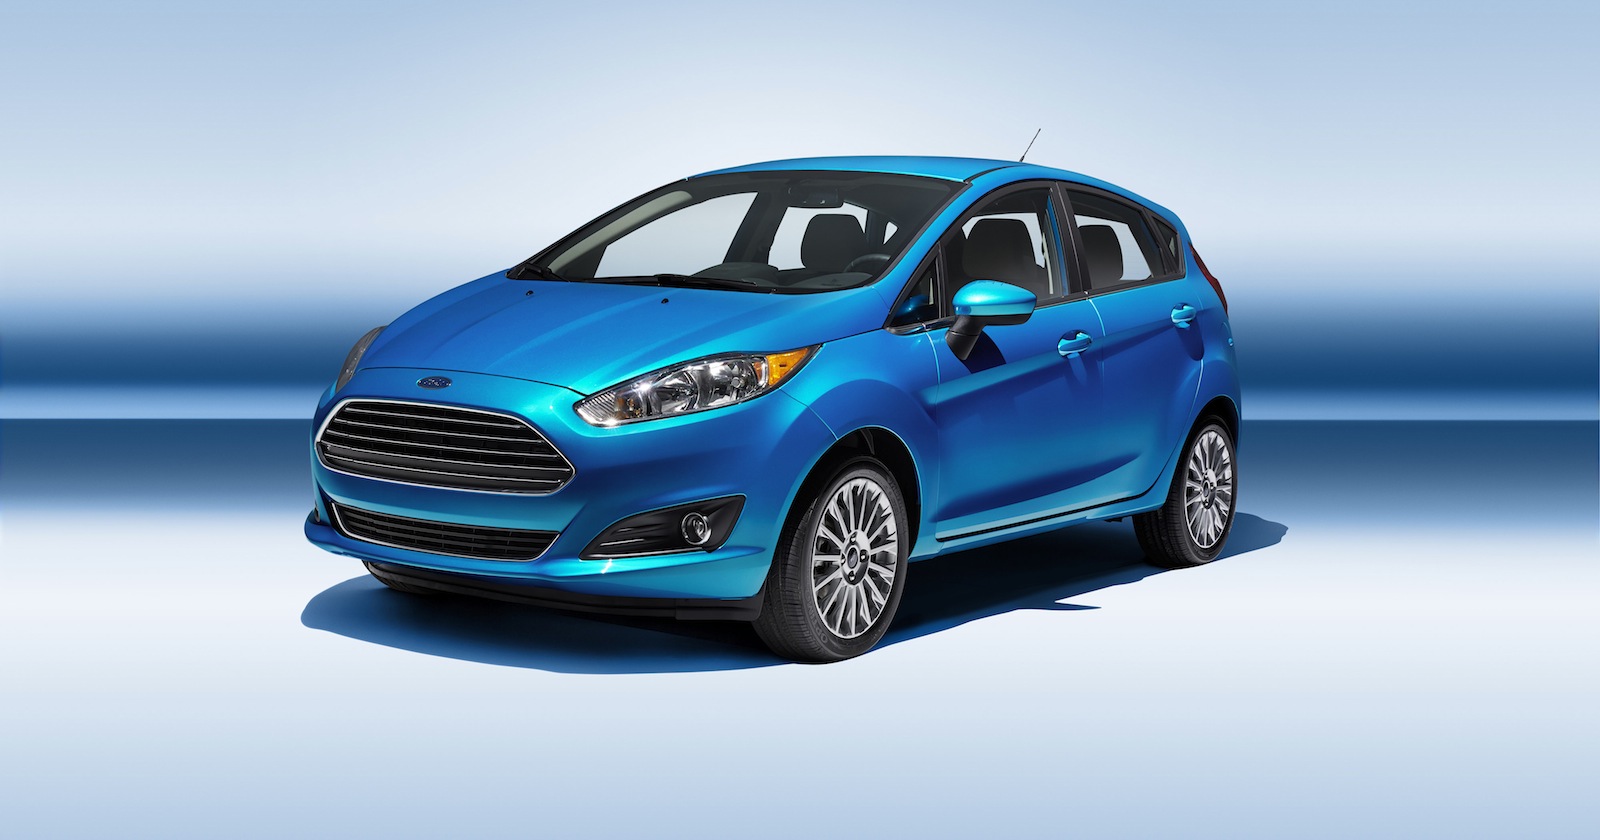 2014 Ford Fiesta Updates: Styling, Interior, MyFordTouch, And EcoBoost